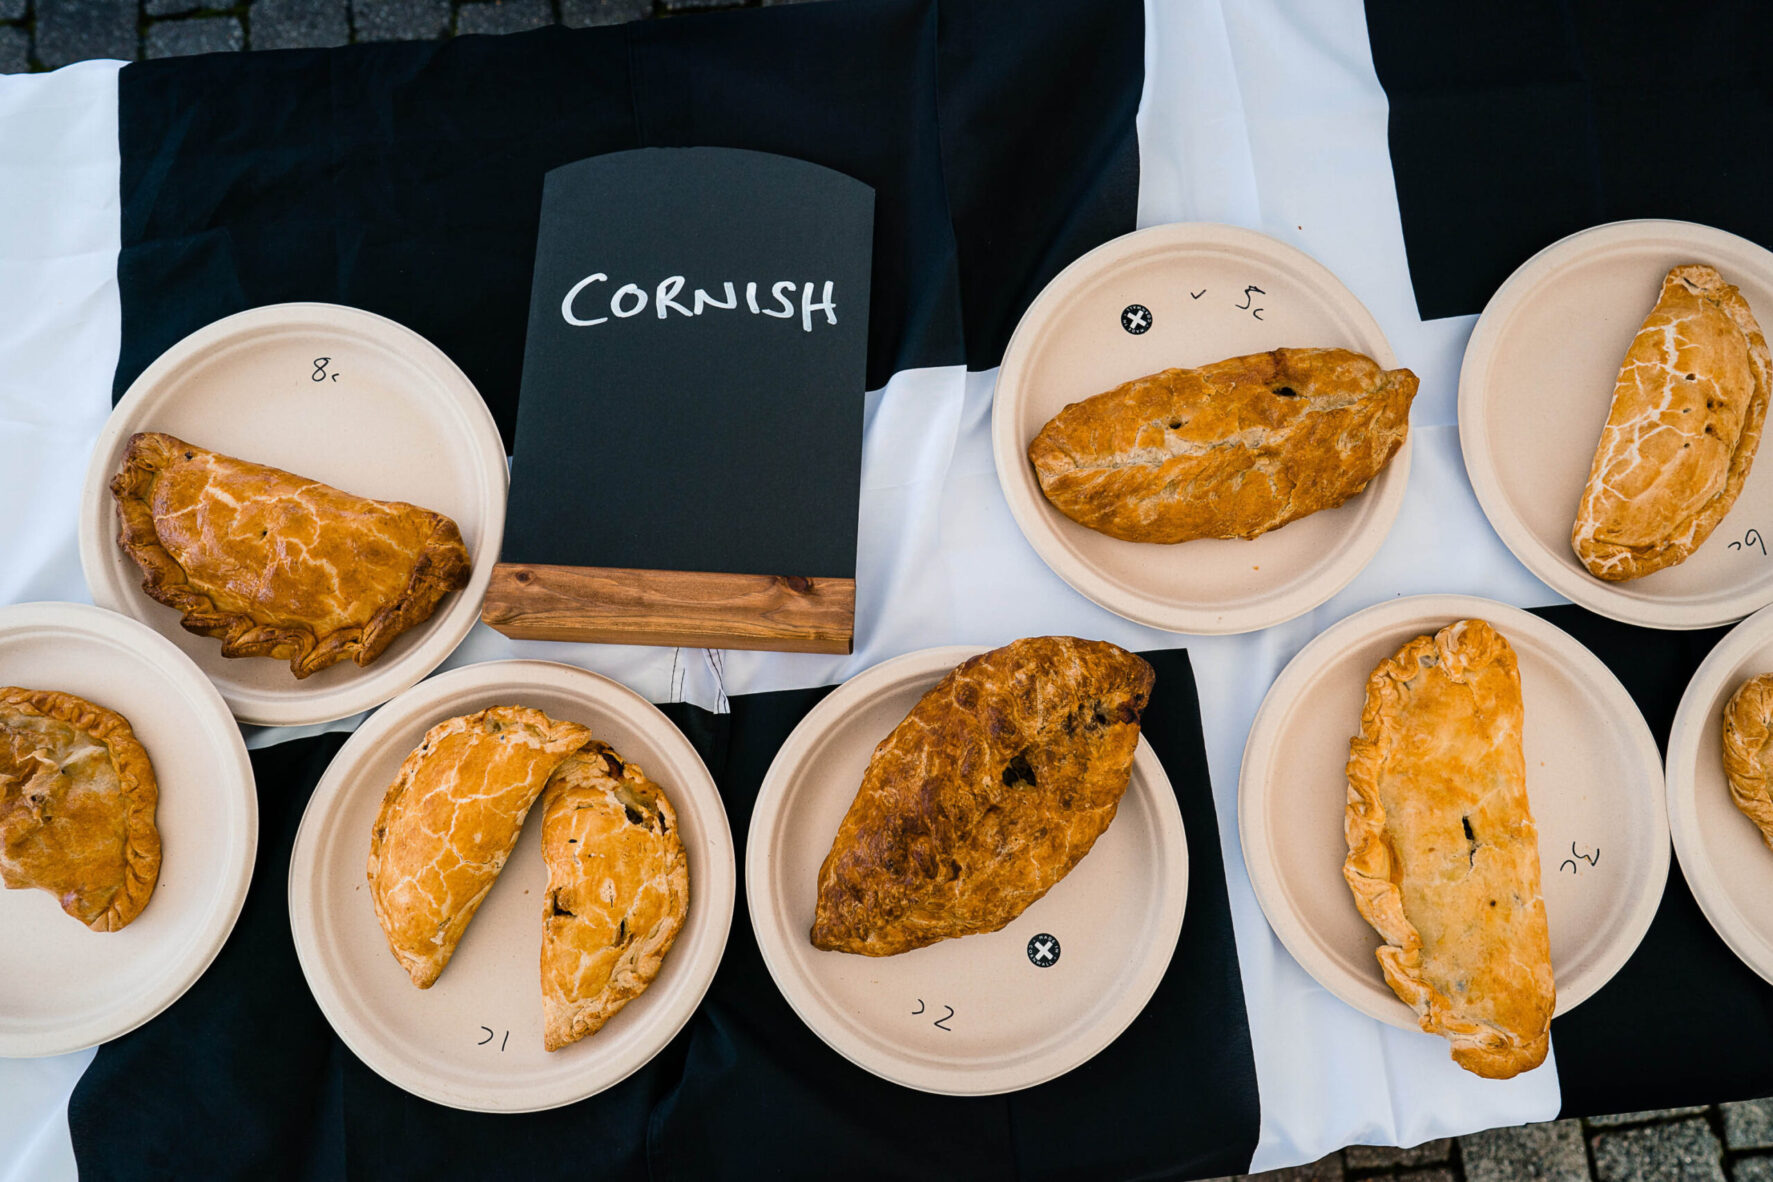 Date announced for Truro’s St Piran’s Market and Pasty Making Competition